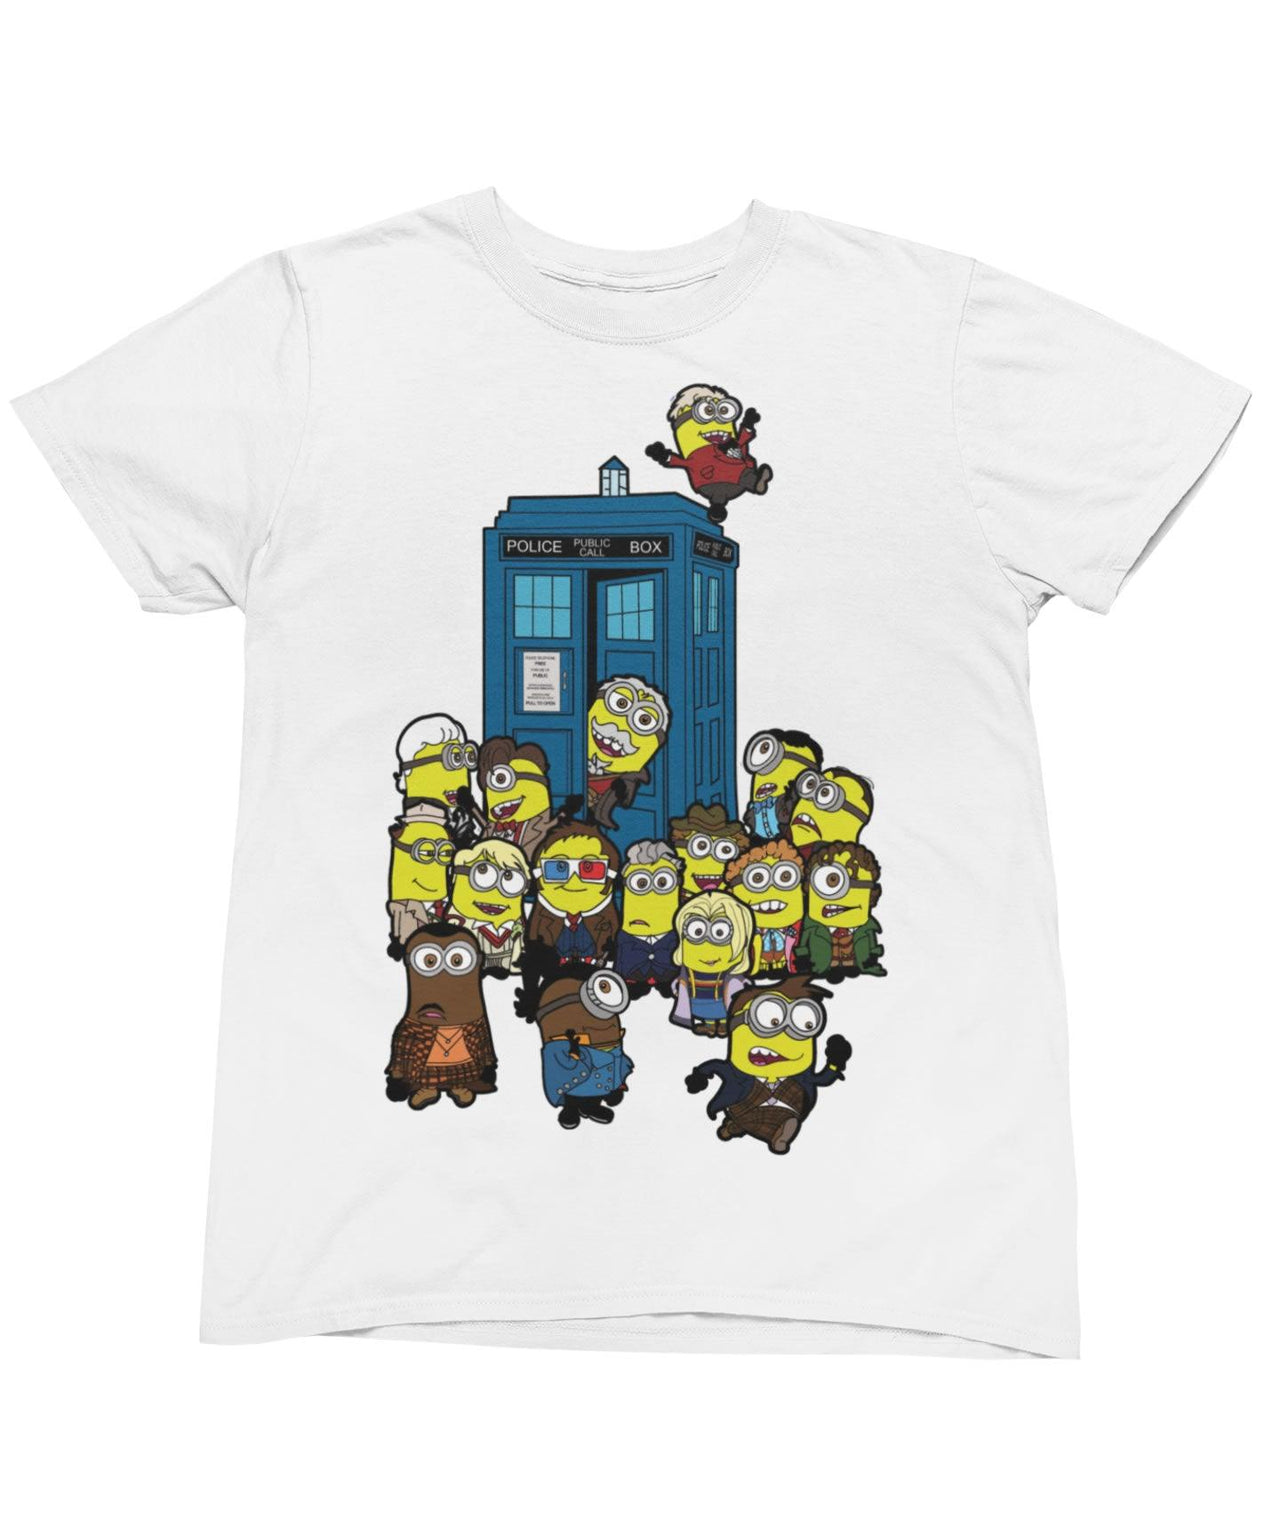 Top Notchy Doctor Minions Men's/Unisex Unisex T-Shirt For Men And Women 8Ball